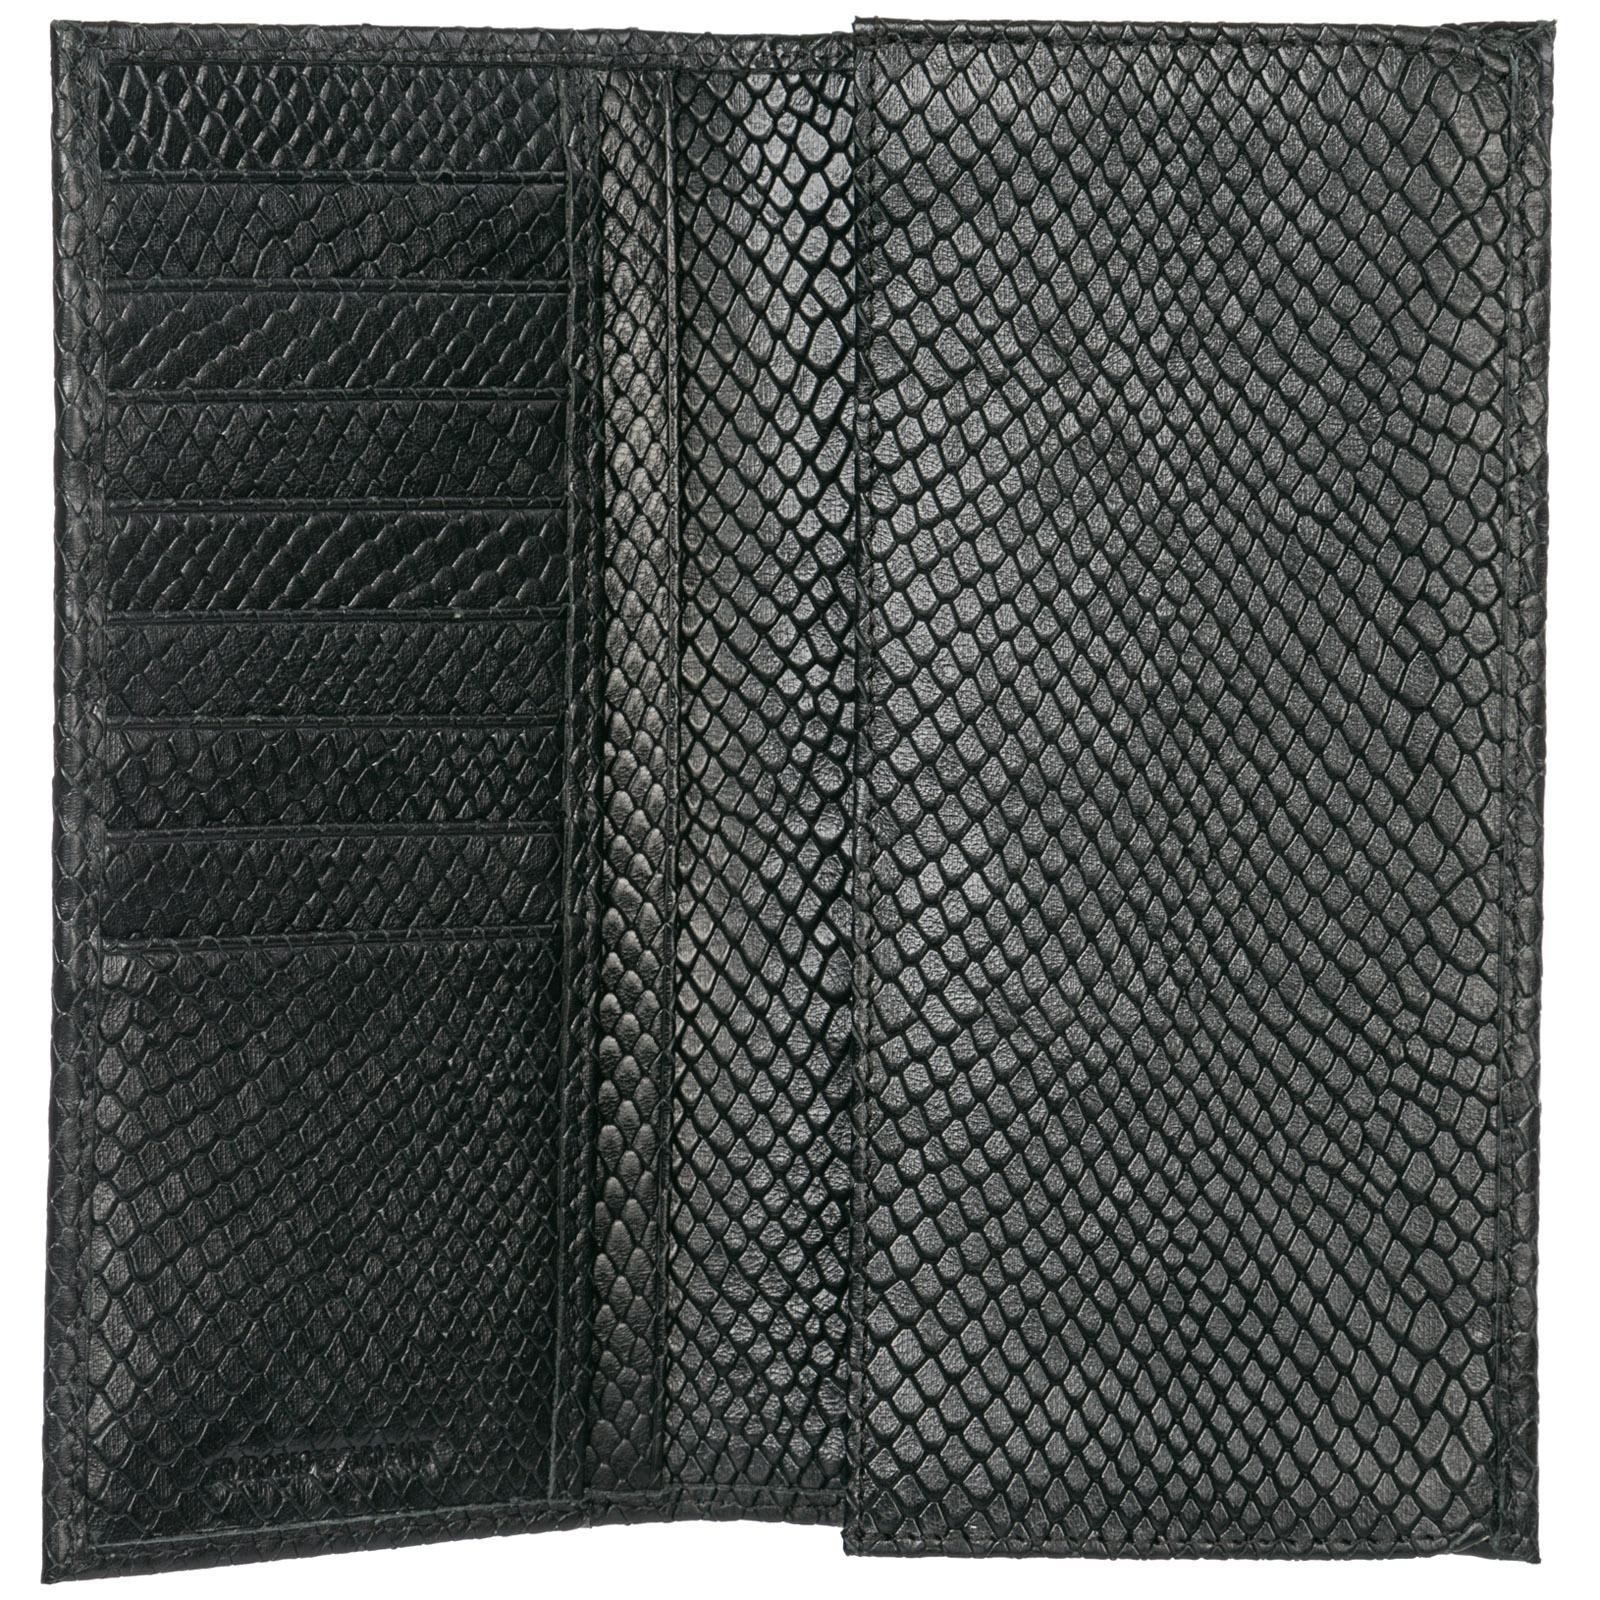 Emporio Armani Wallet Genuine Leather Coin Case Holder Purse Card Bifold in Black for Men - Lyst